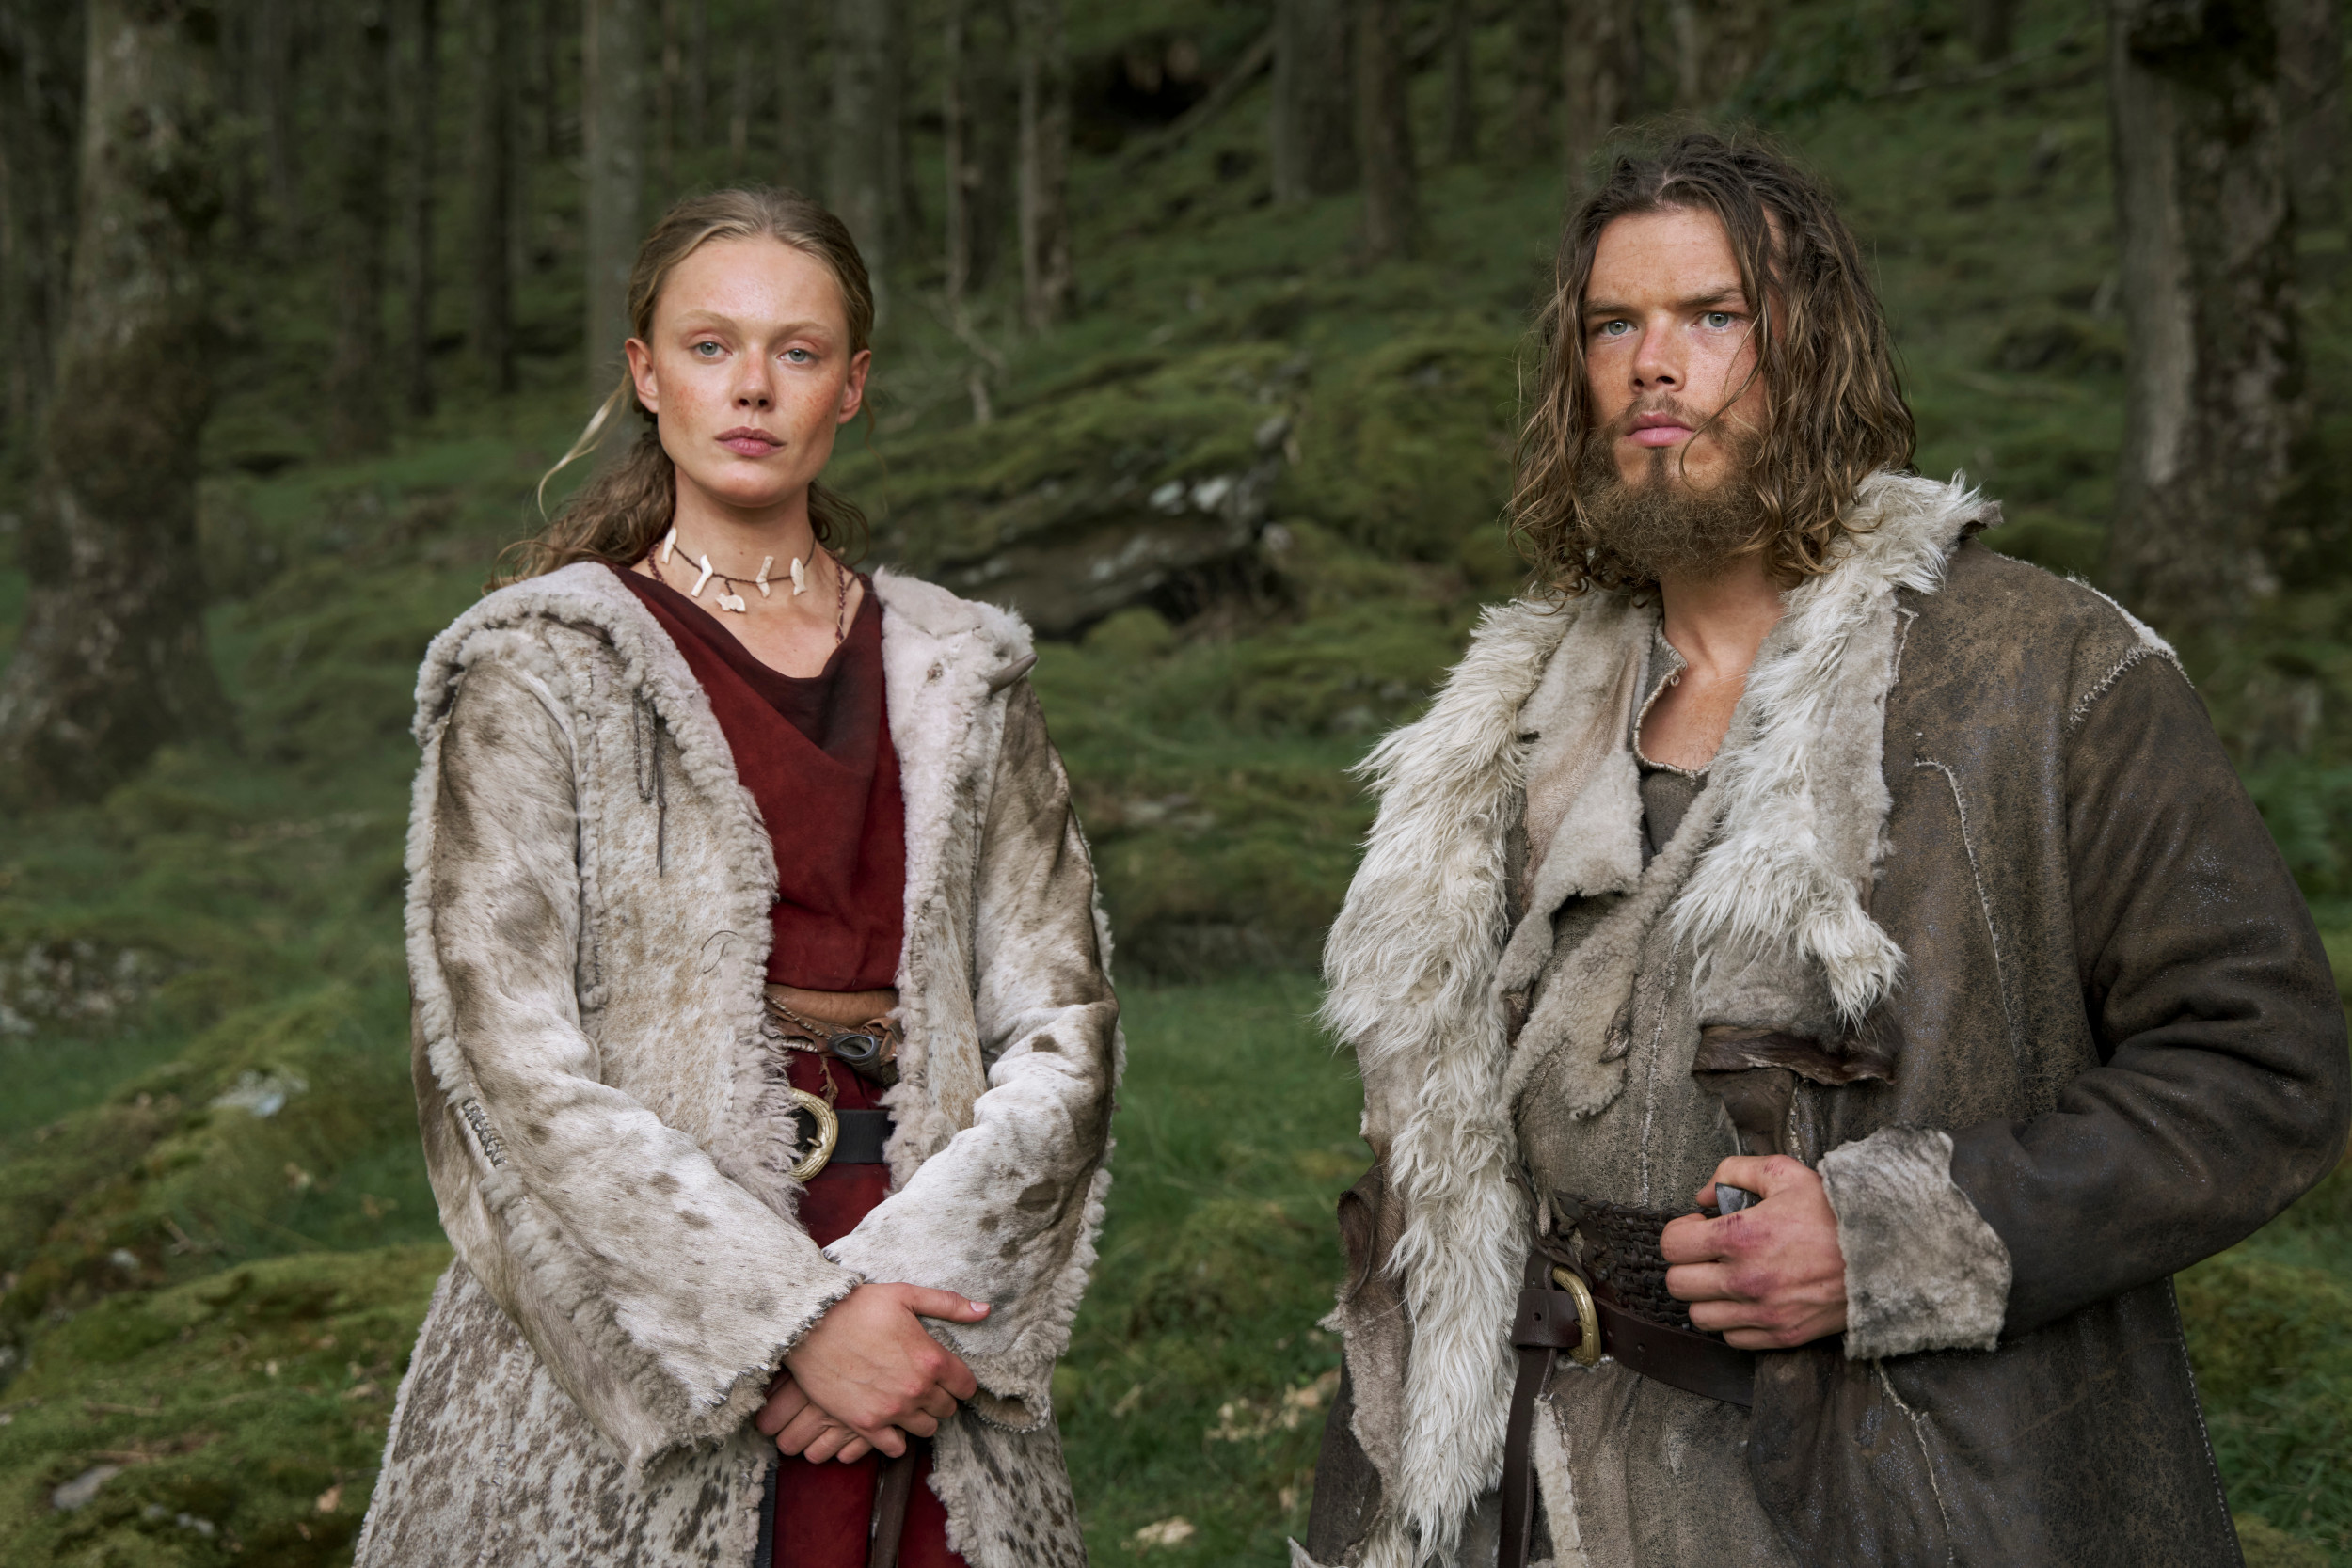 'Vikings Valhalla' Release Date, Cast, Trailer, Plot—All We Know About